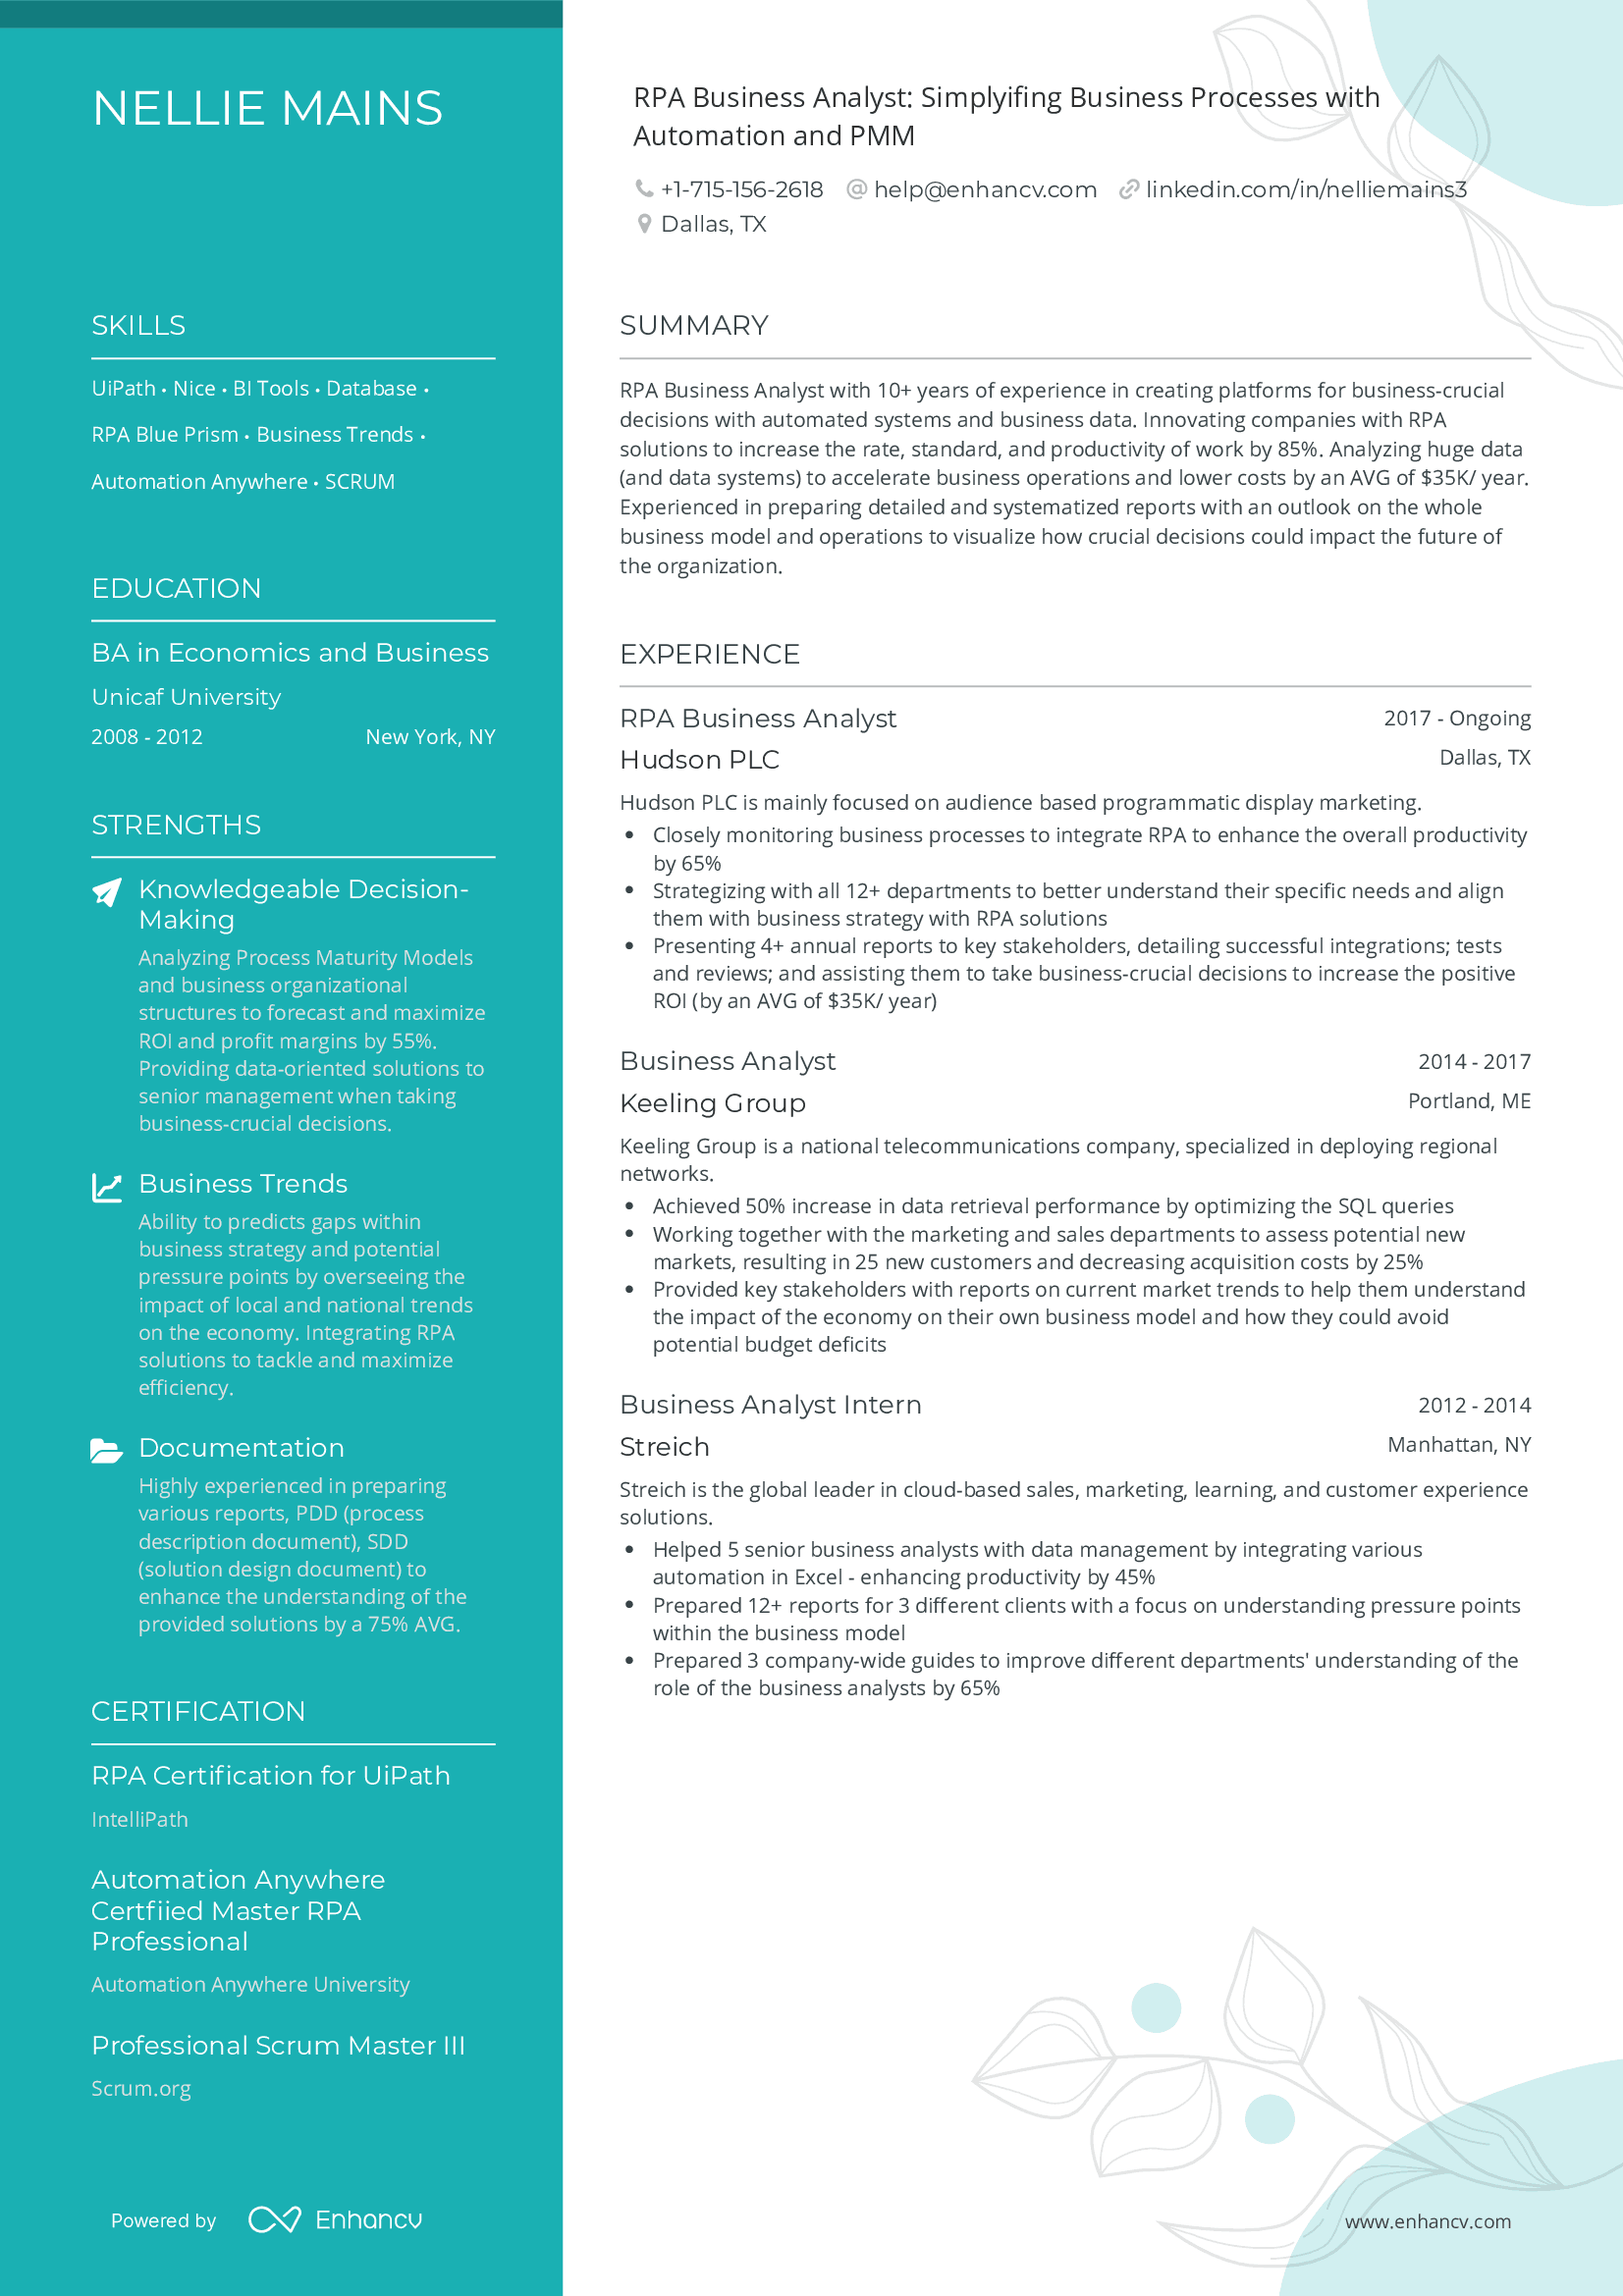 RPA Business Analyst resume.png